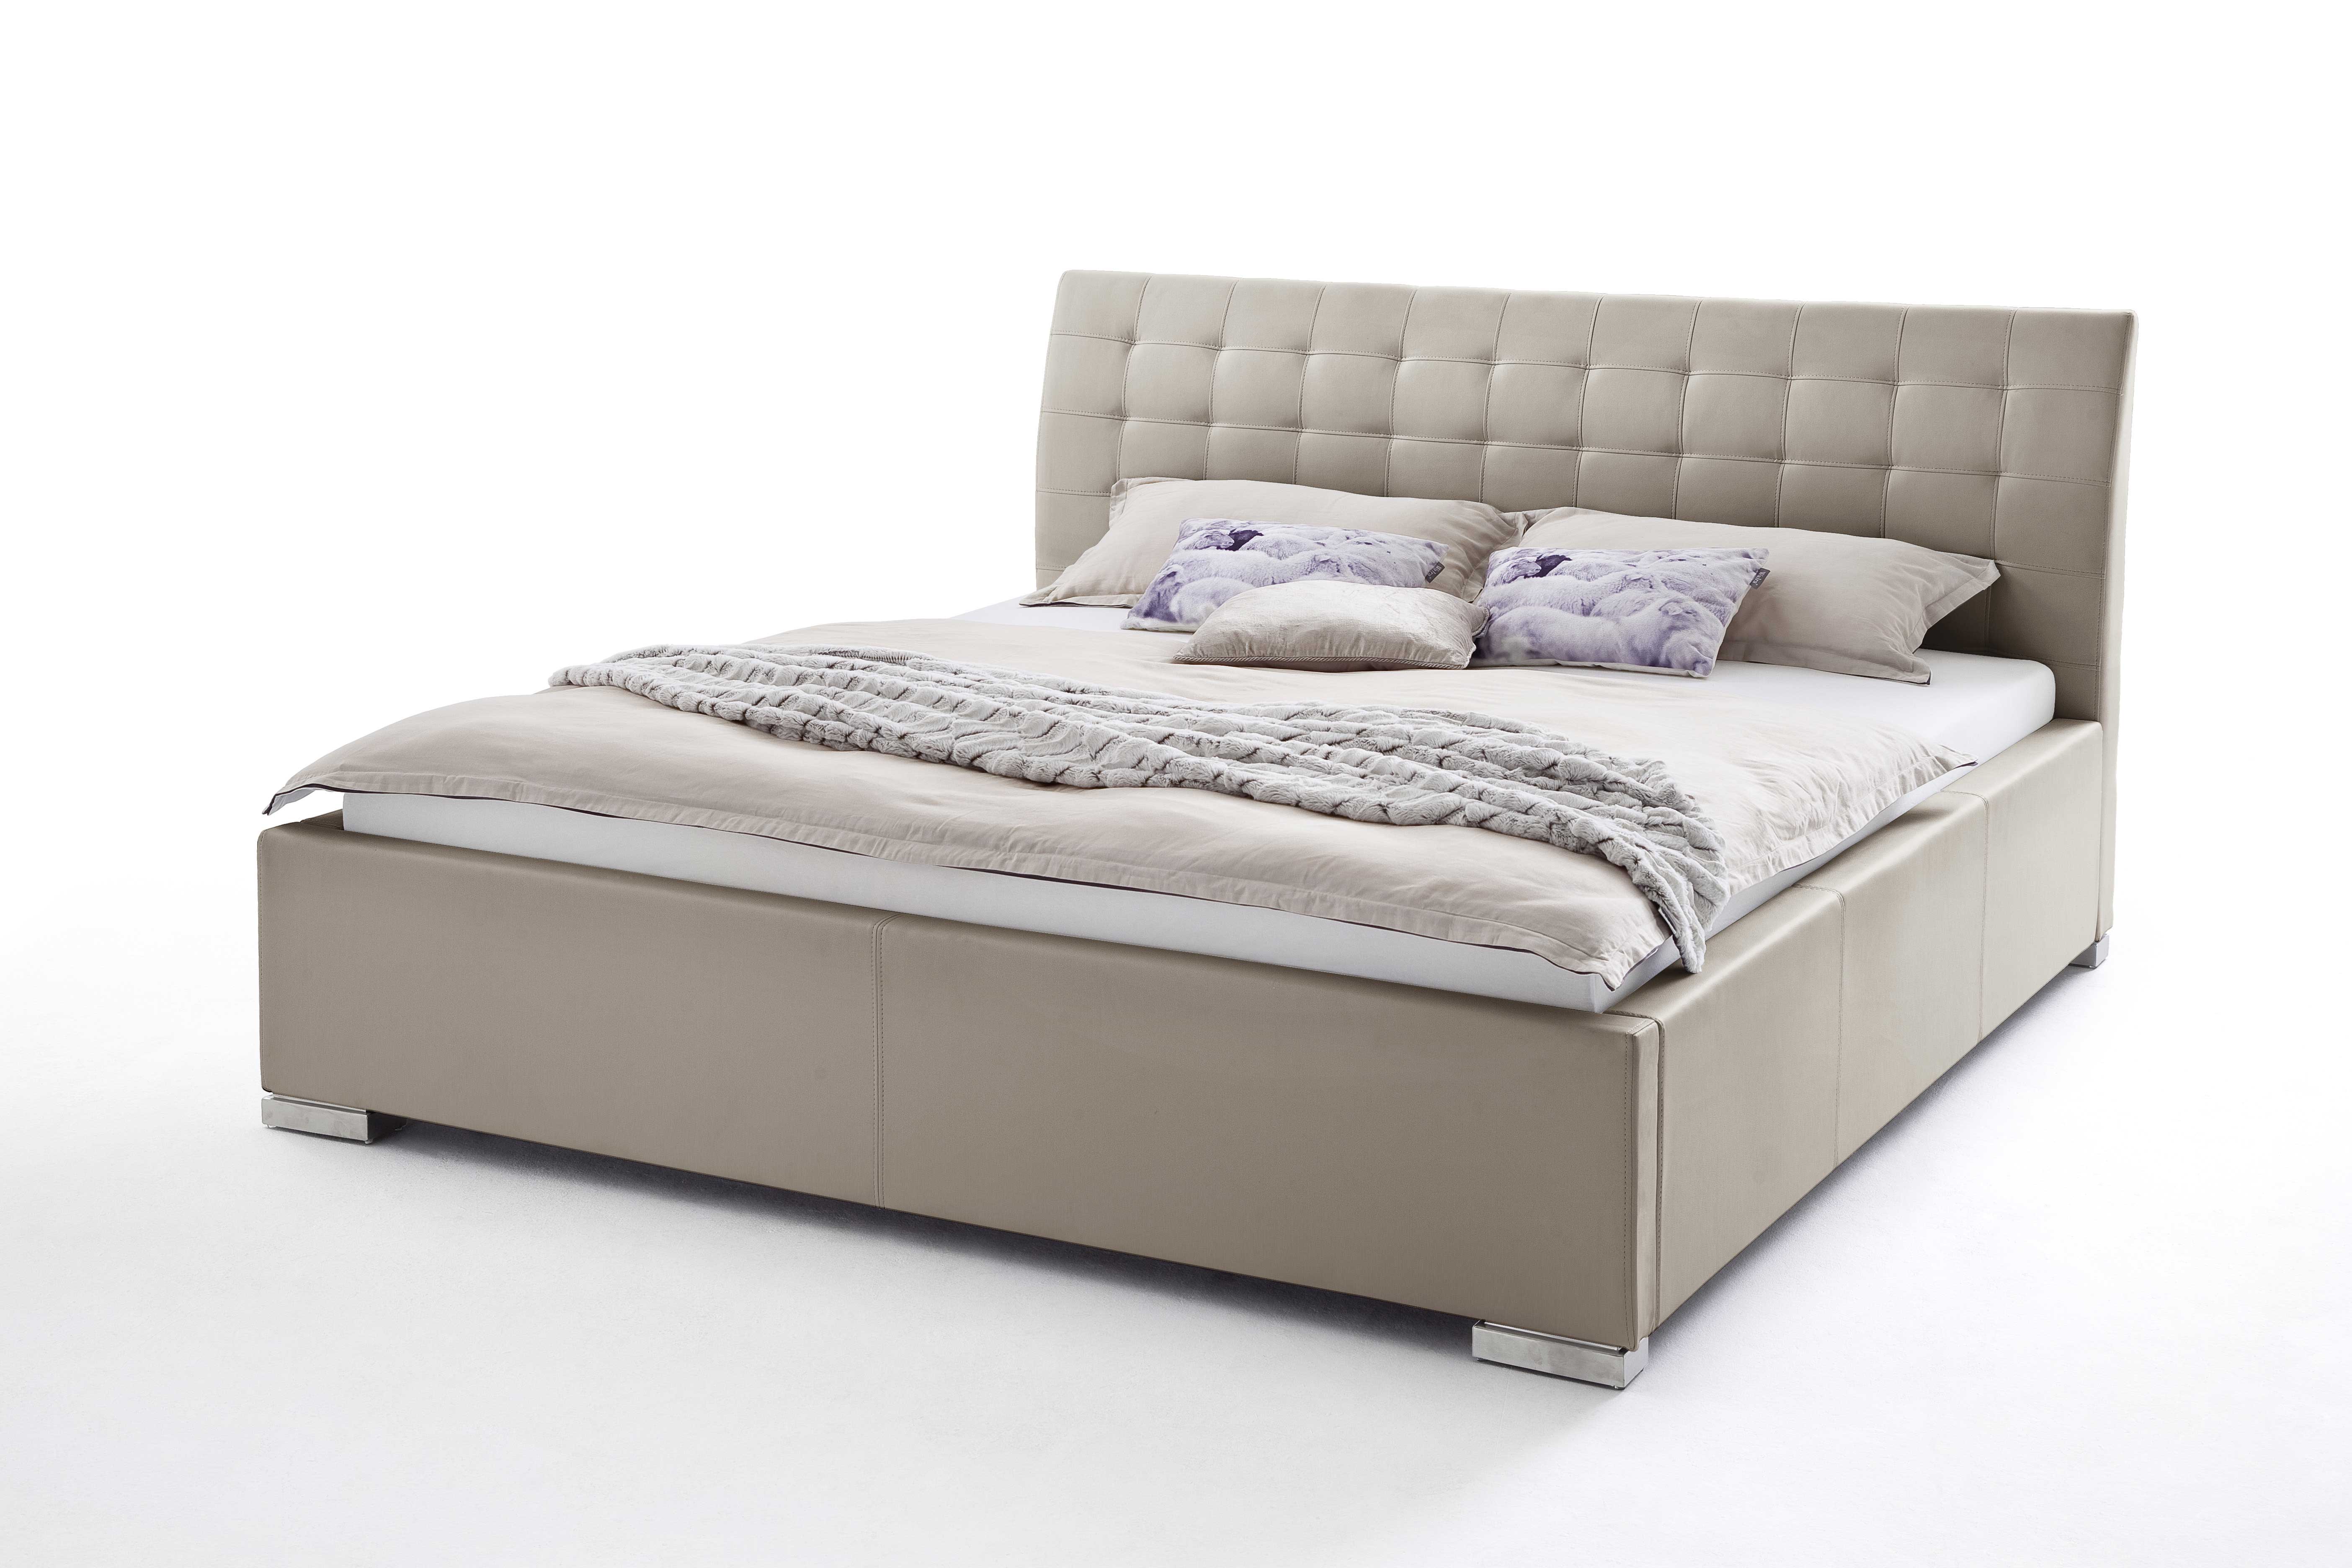 Meise Bed Isa Comfort 200x200cm - taupe